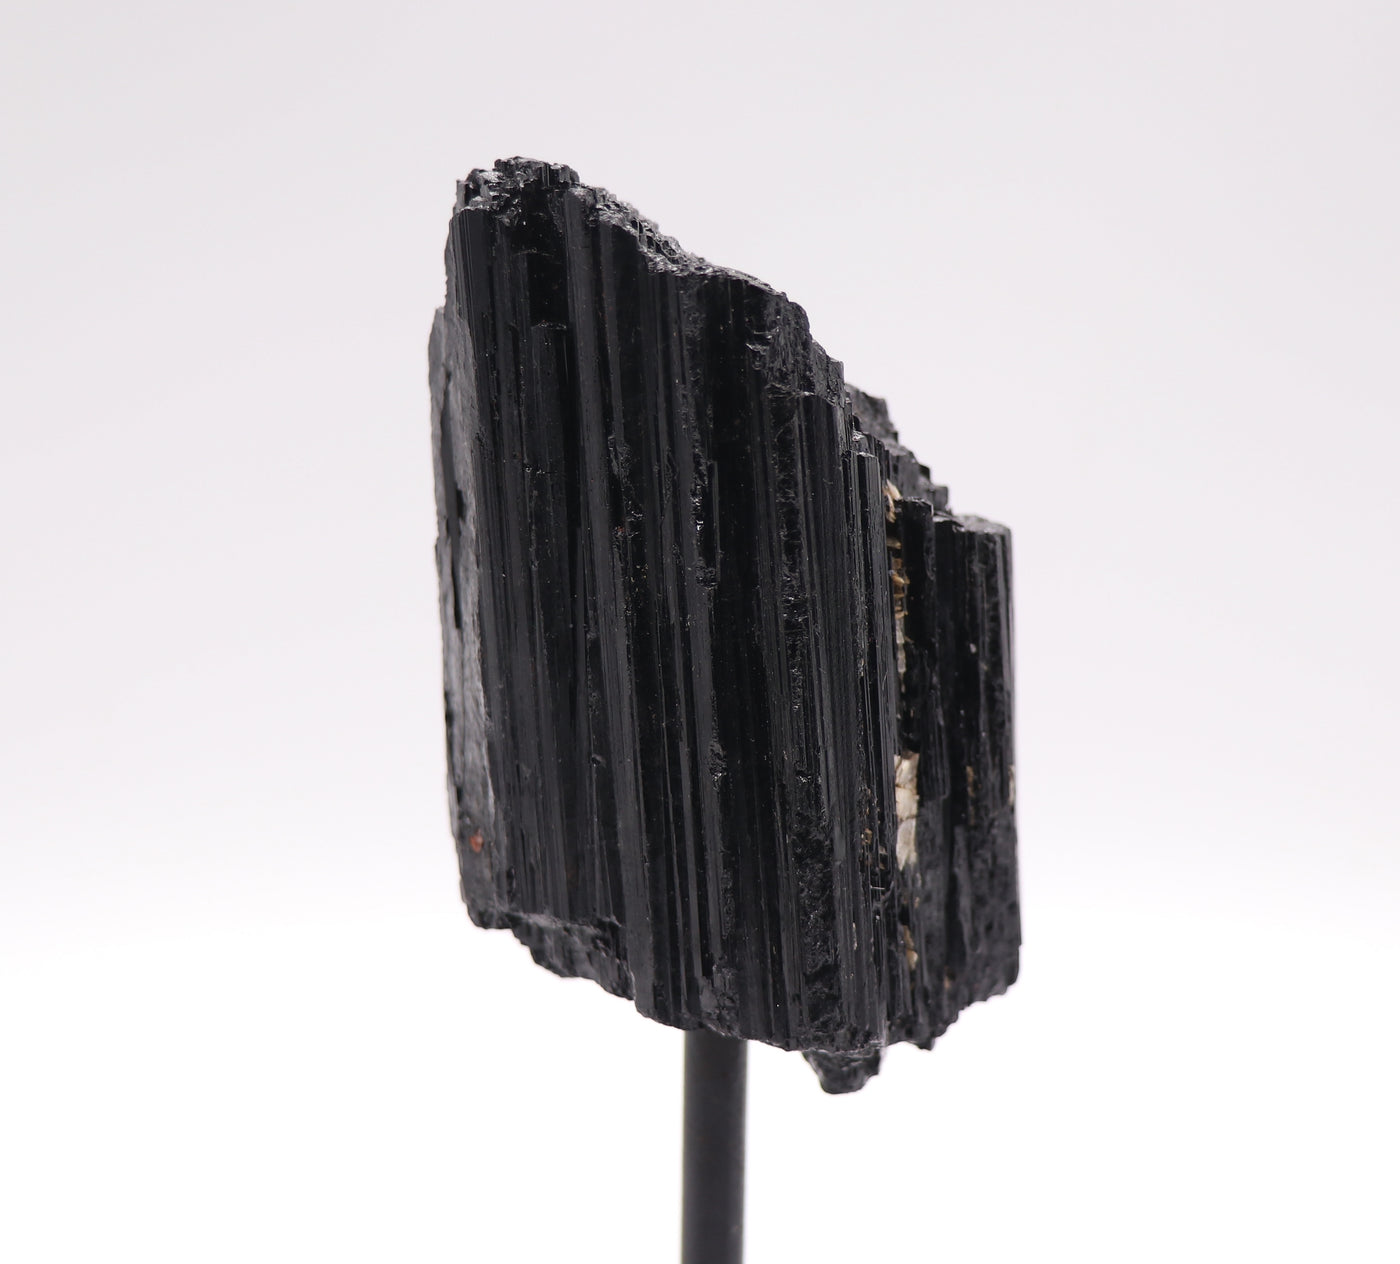 1174 Black Tourmaline on stand 320g 5.5in x 3in